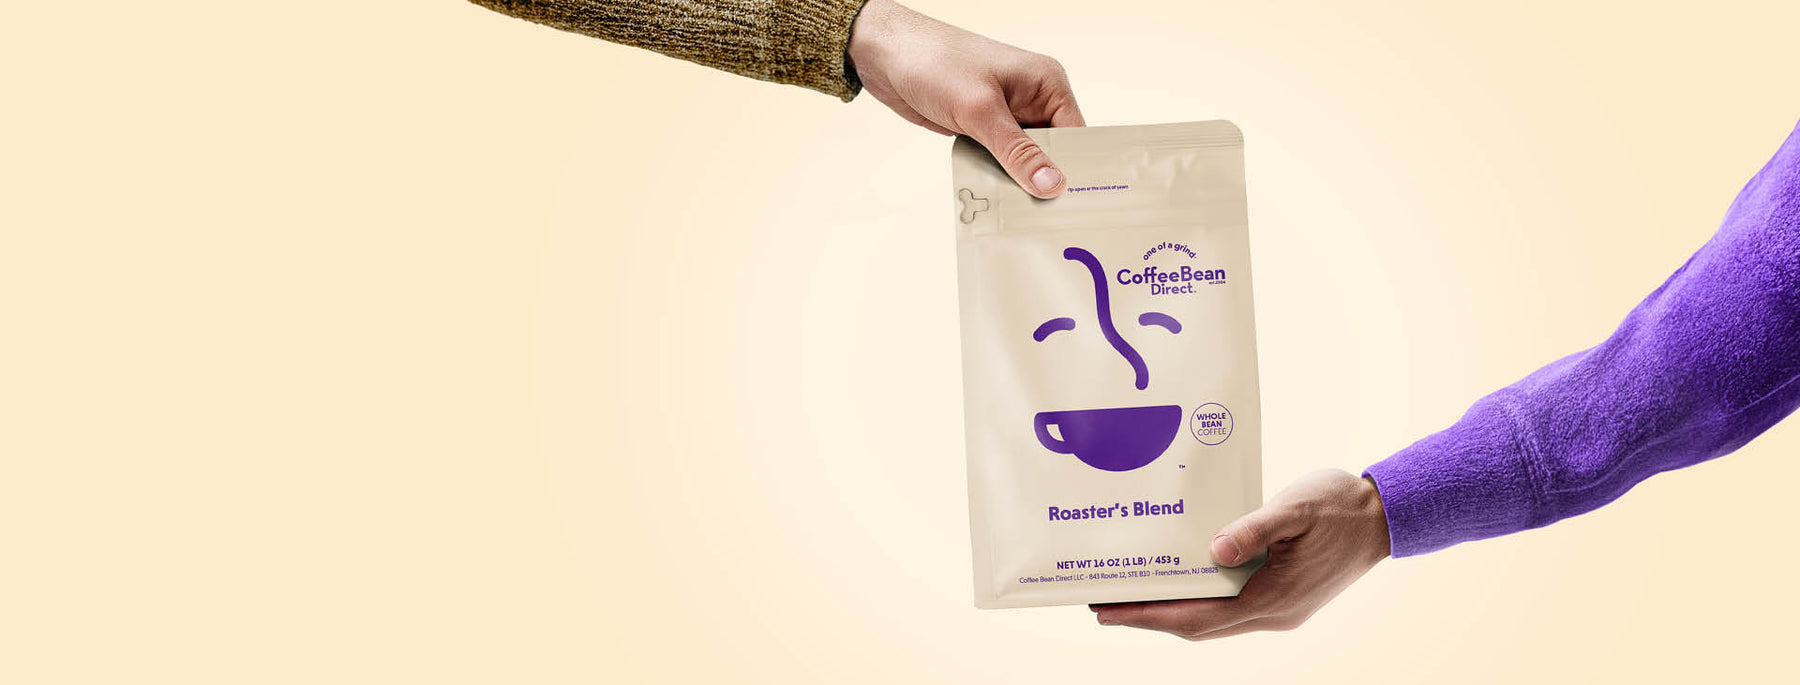 Give a Subscription -- person handing bag of Coffee Bean Direct Roaster's Blend to another person